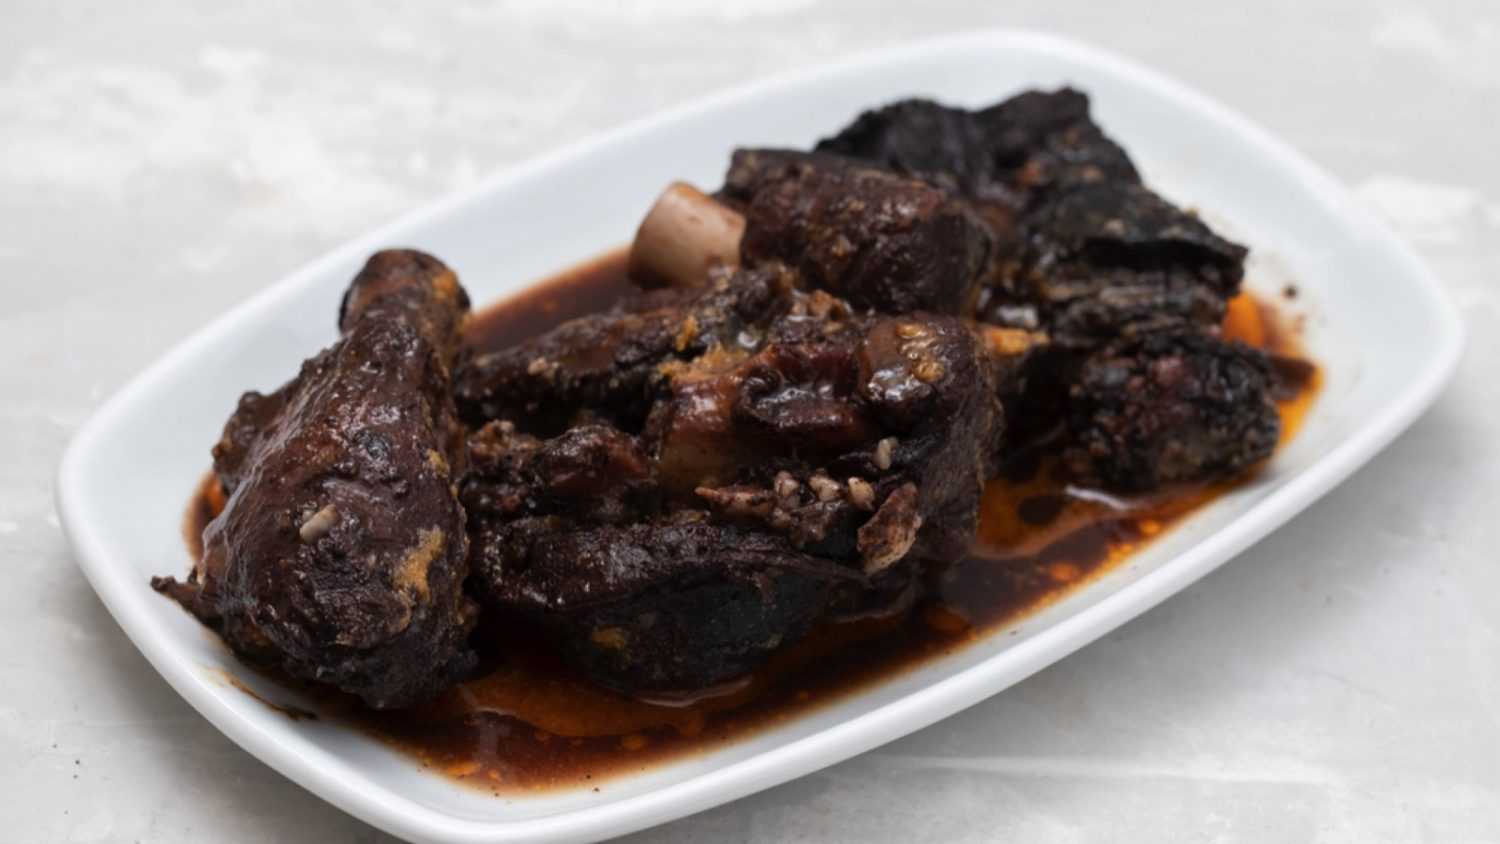 Old goat meat dish Chanfana